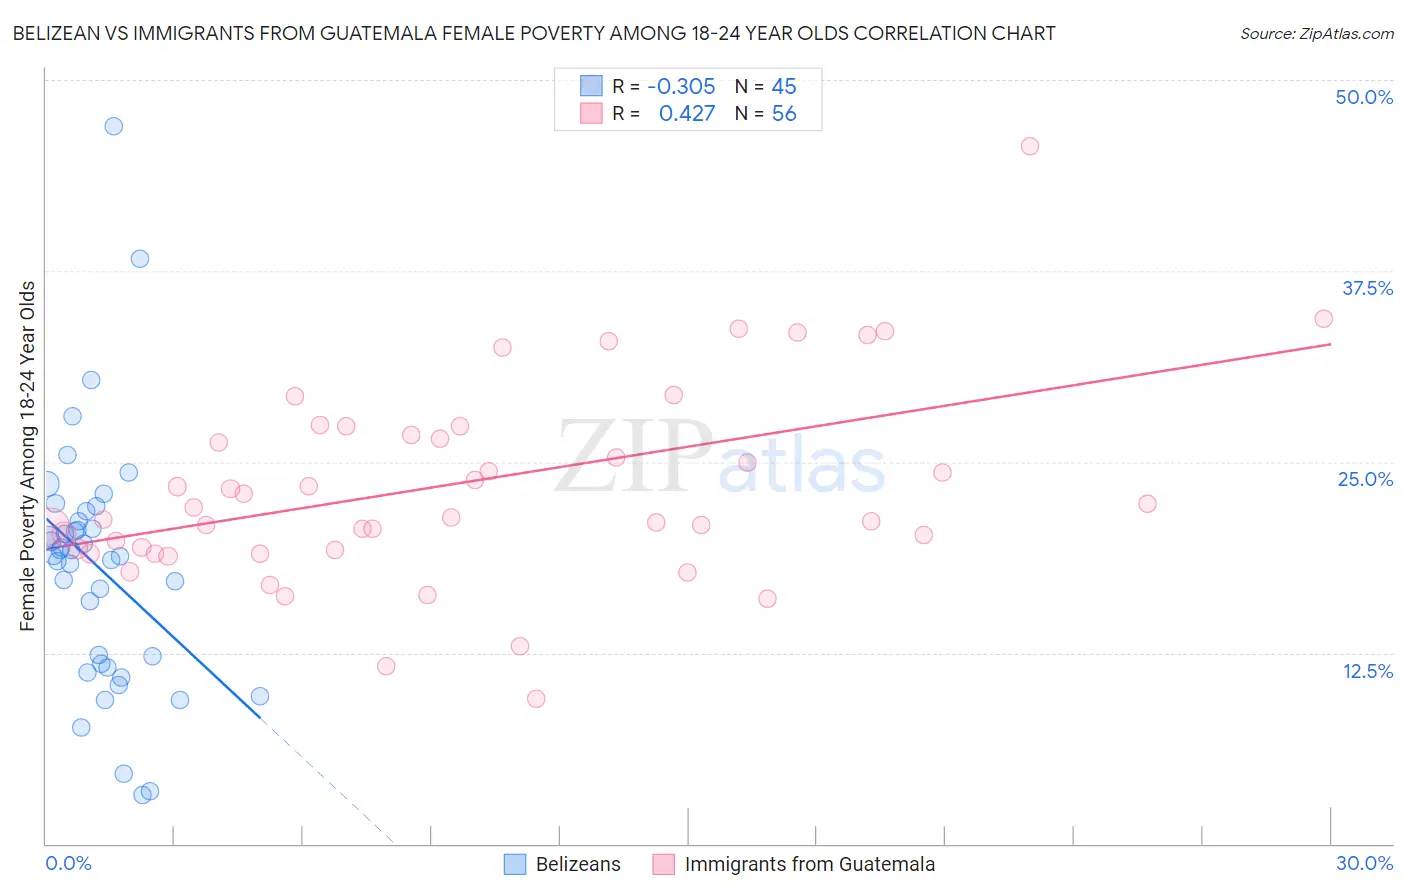 Belizean vs Immigrants from Guatemala Female Poverty Among 18-24 Year Olds